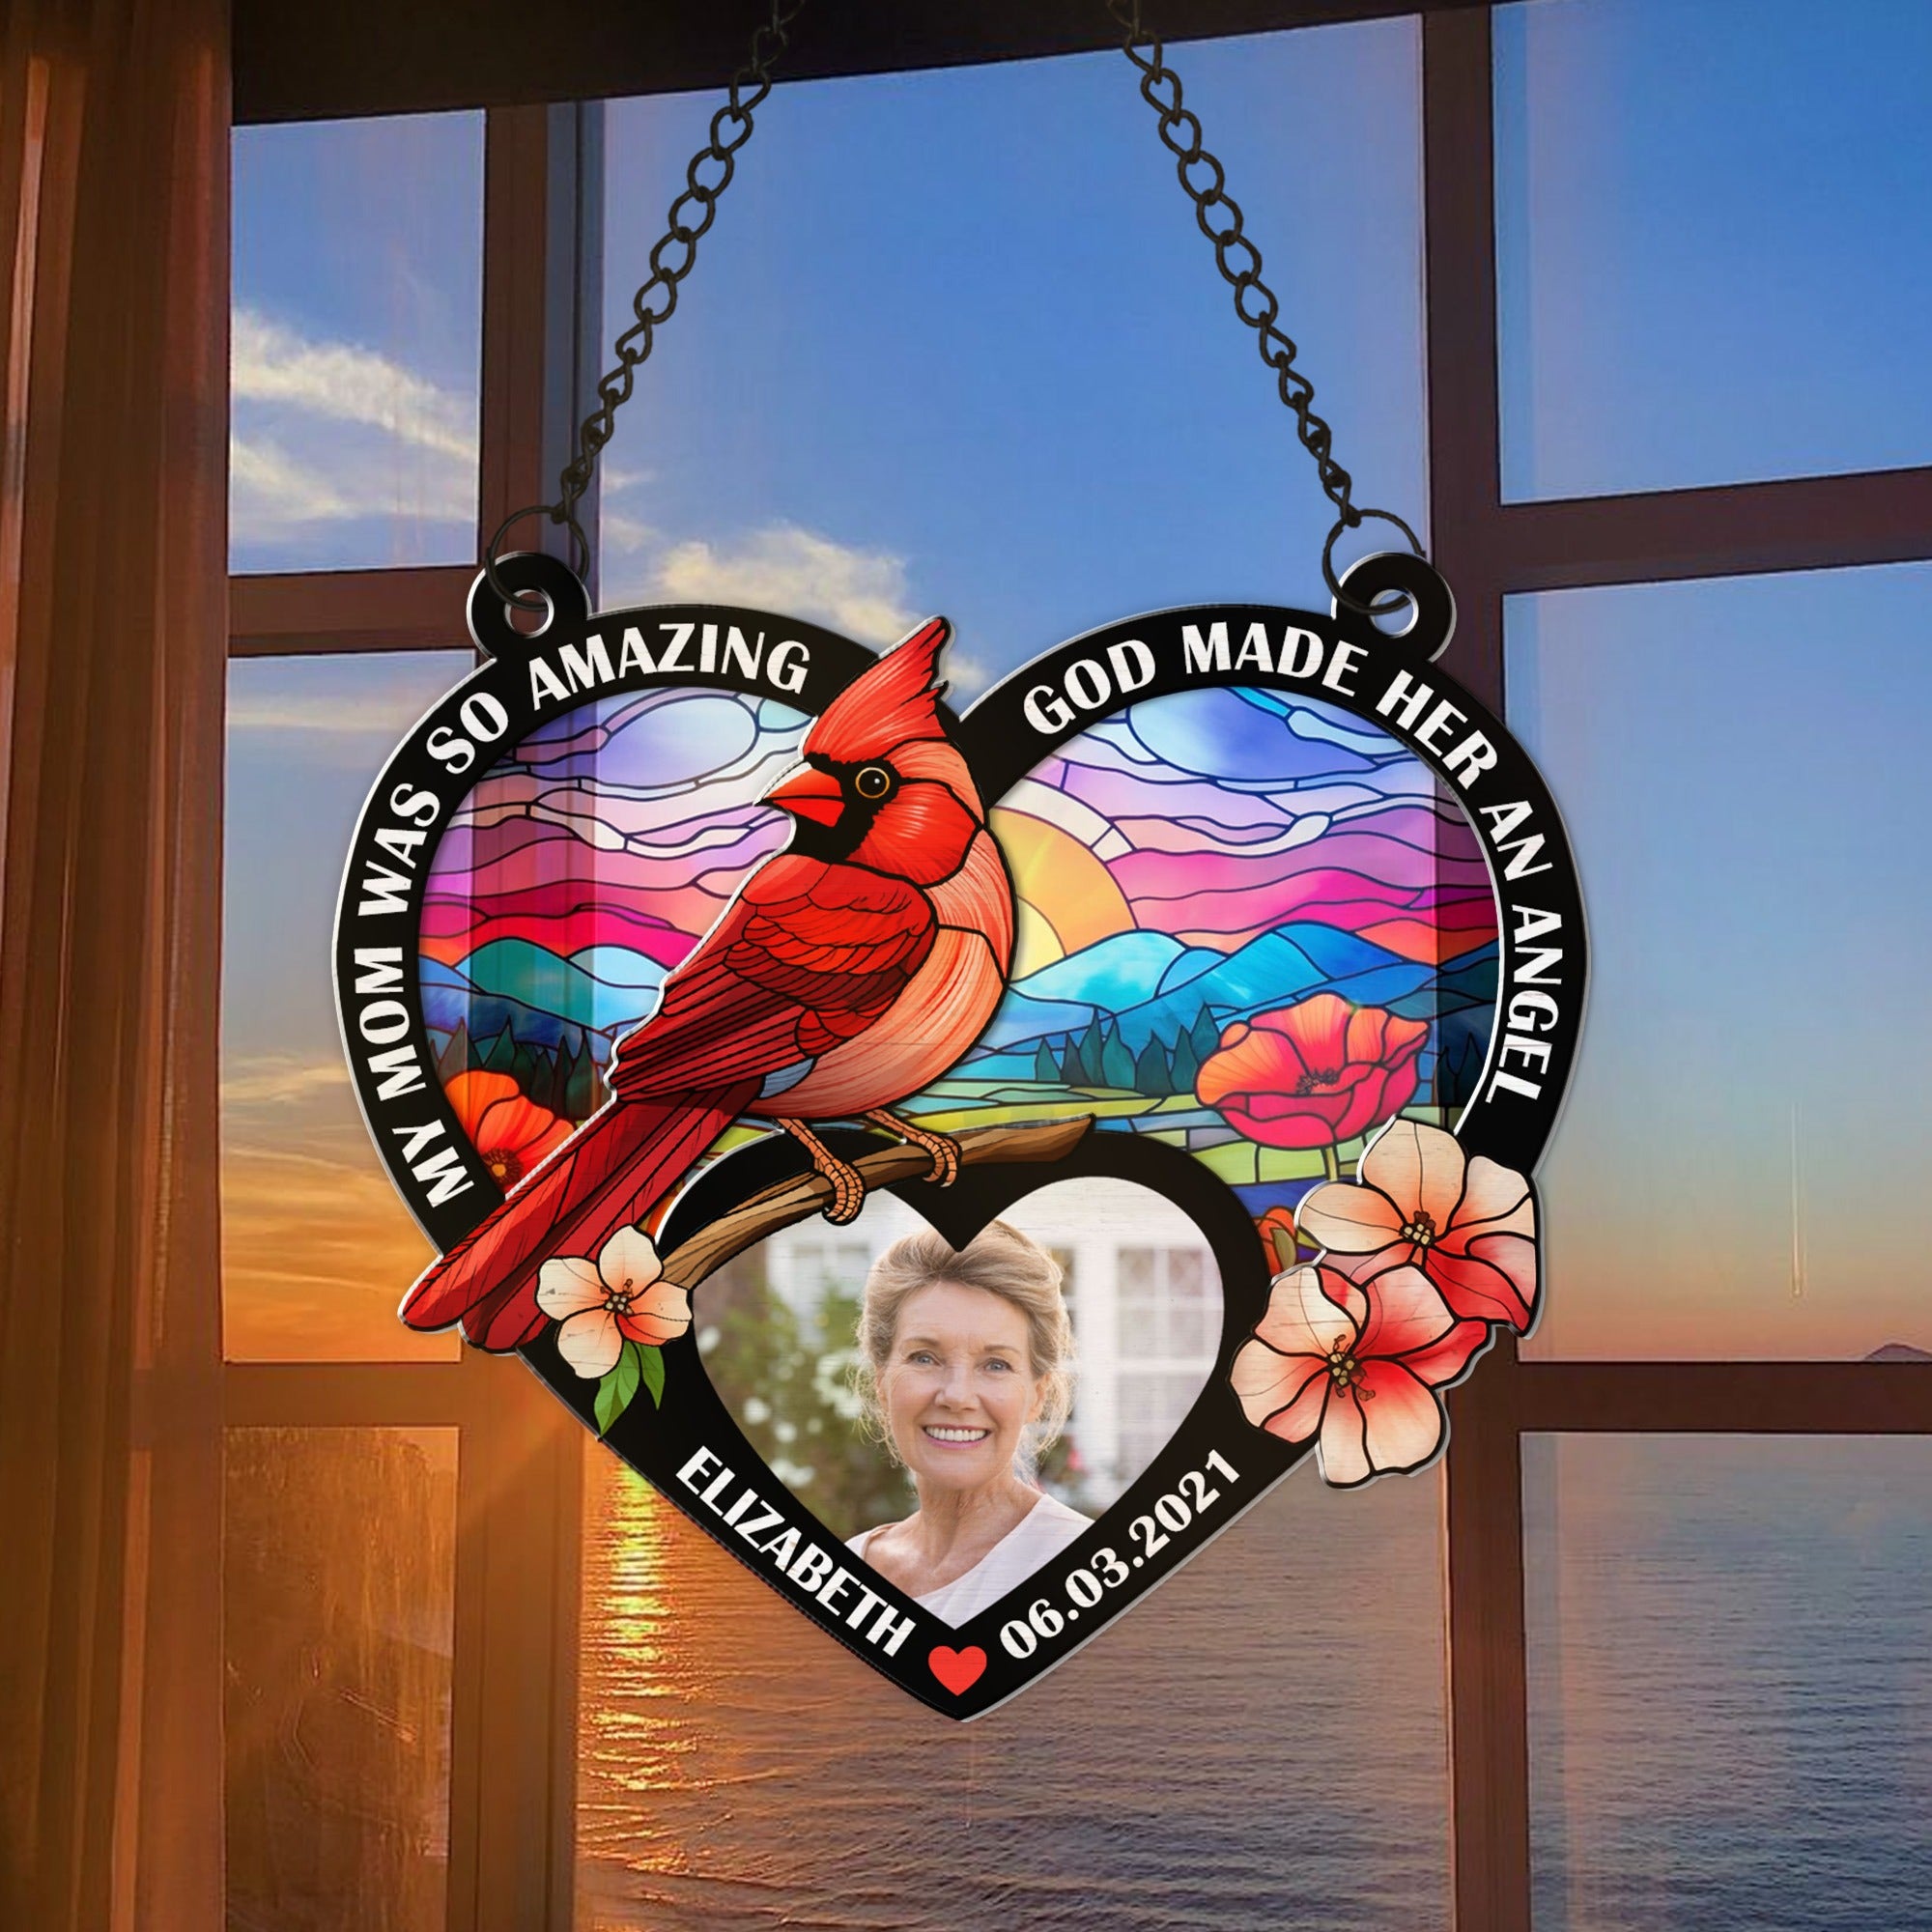 Personalized Mom Memorial, My Mom Was So Amazing, God Made Her an Angel Hanging Suncatcher Ornament